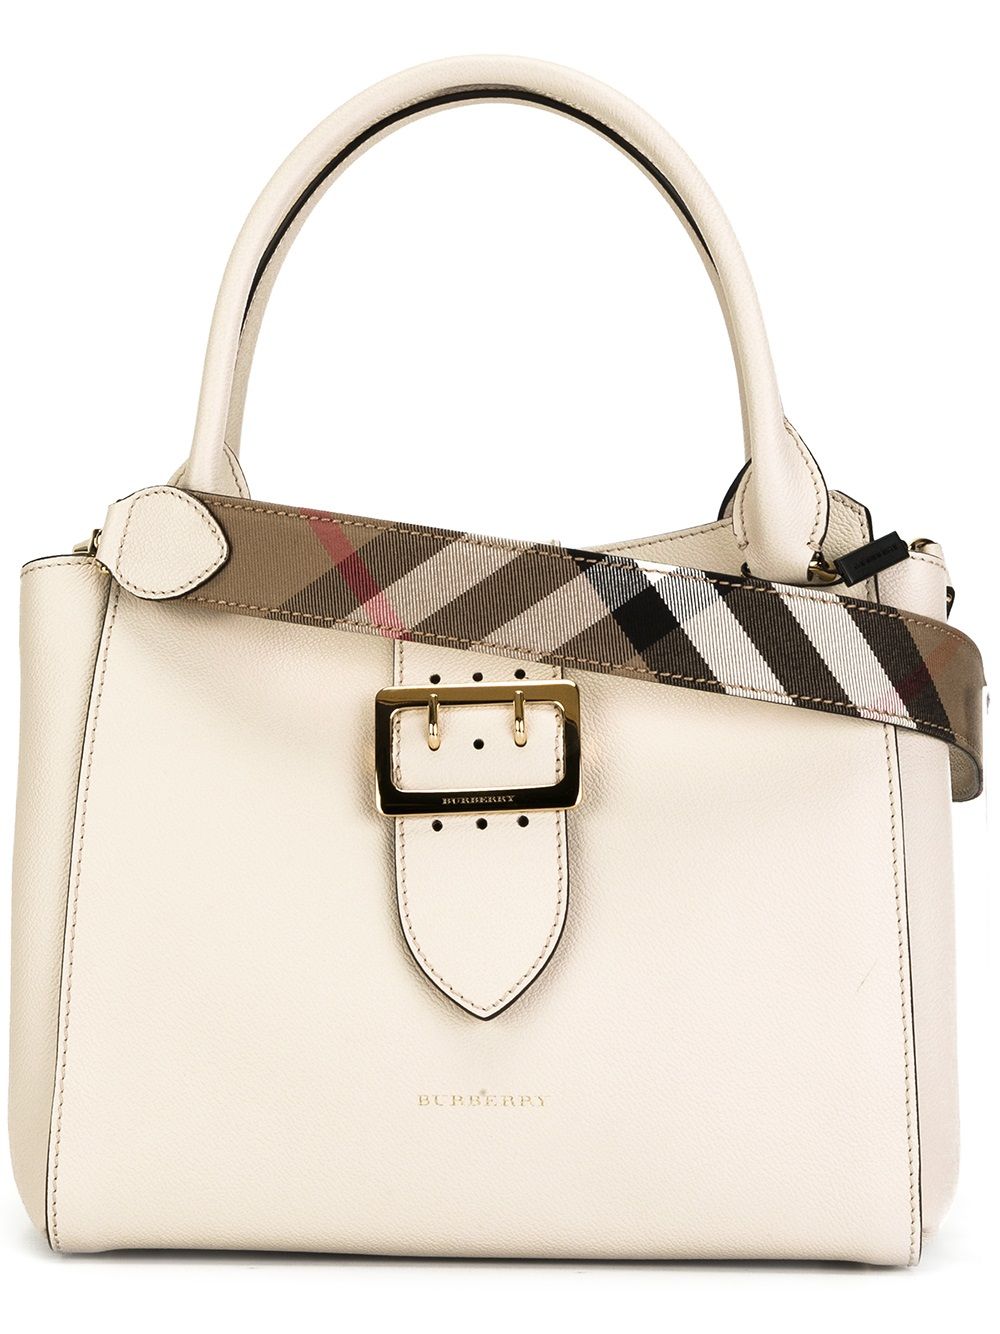 Burberry Medium Buckle Tote In Grainy Leather - Farfetch